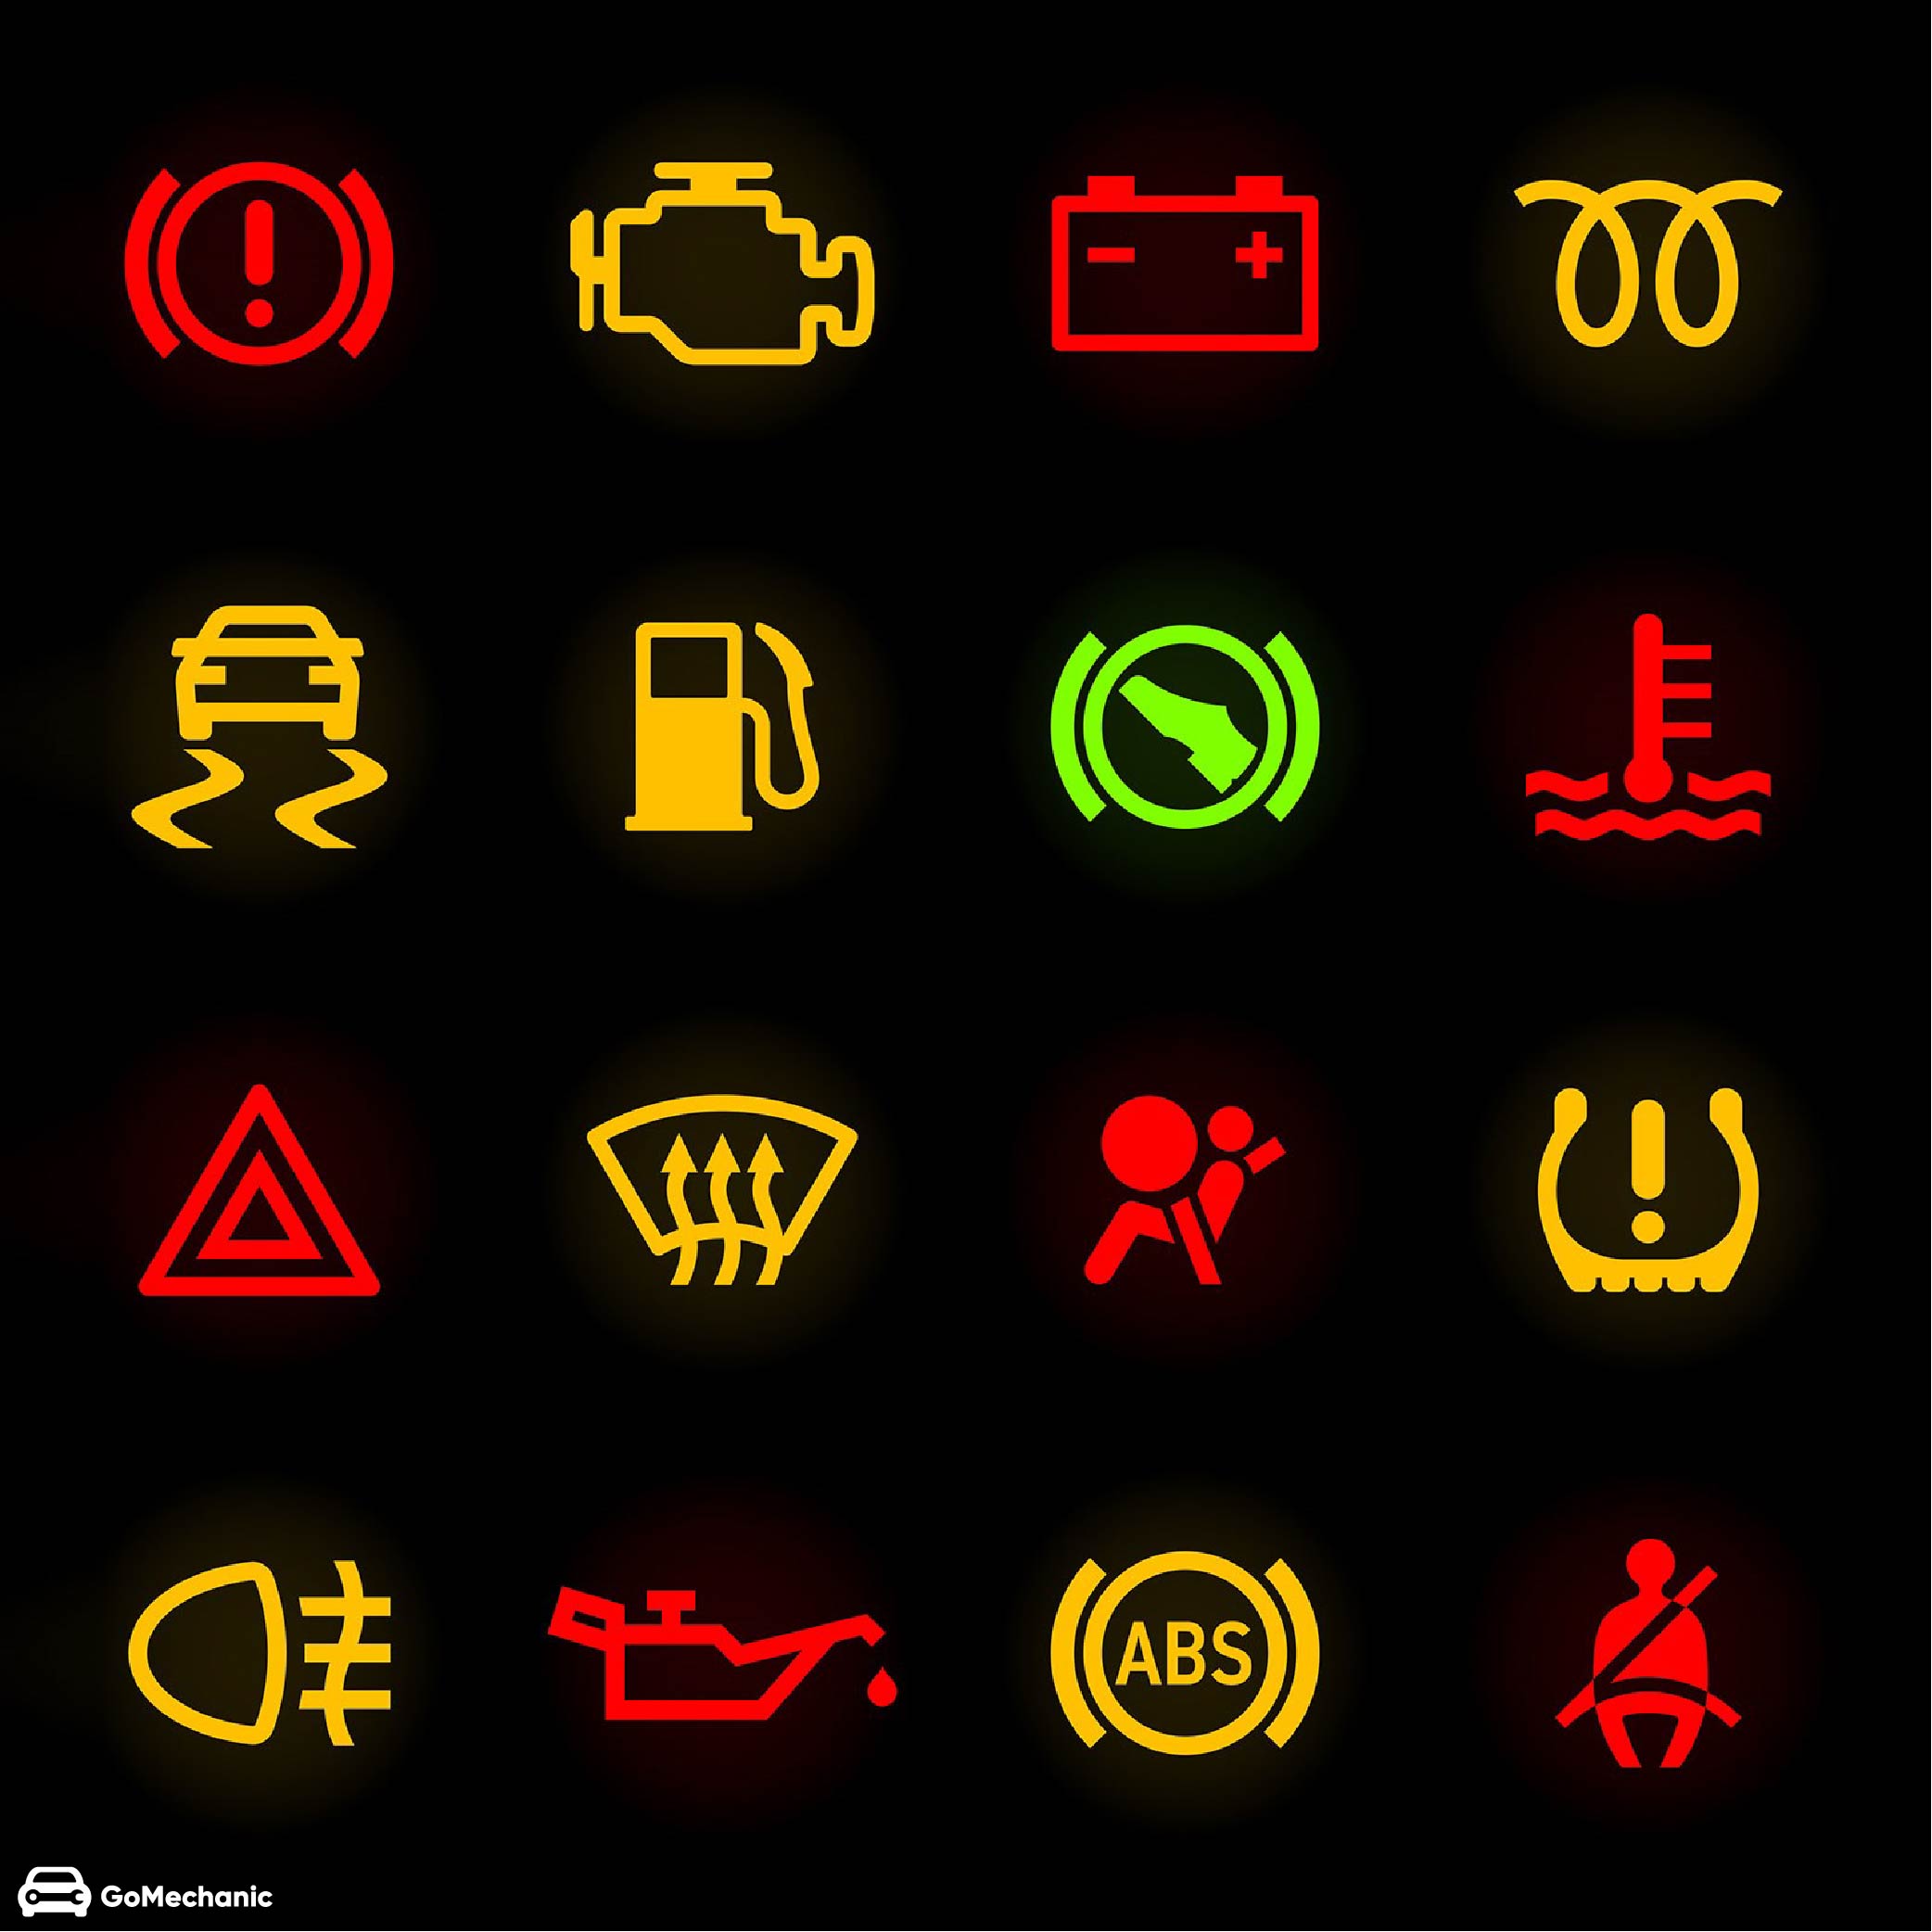 Car Dashboard Warning Lights | All You Need To Know